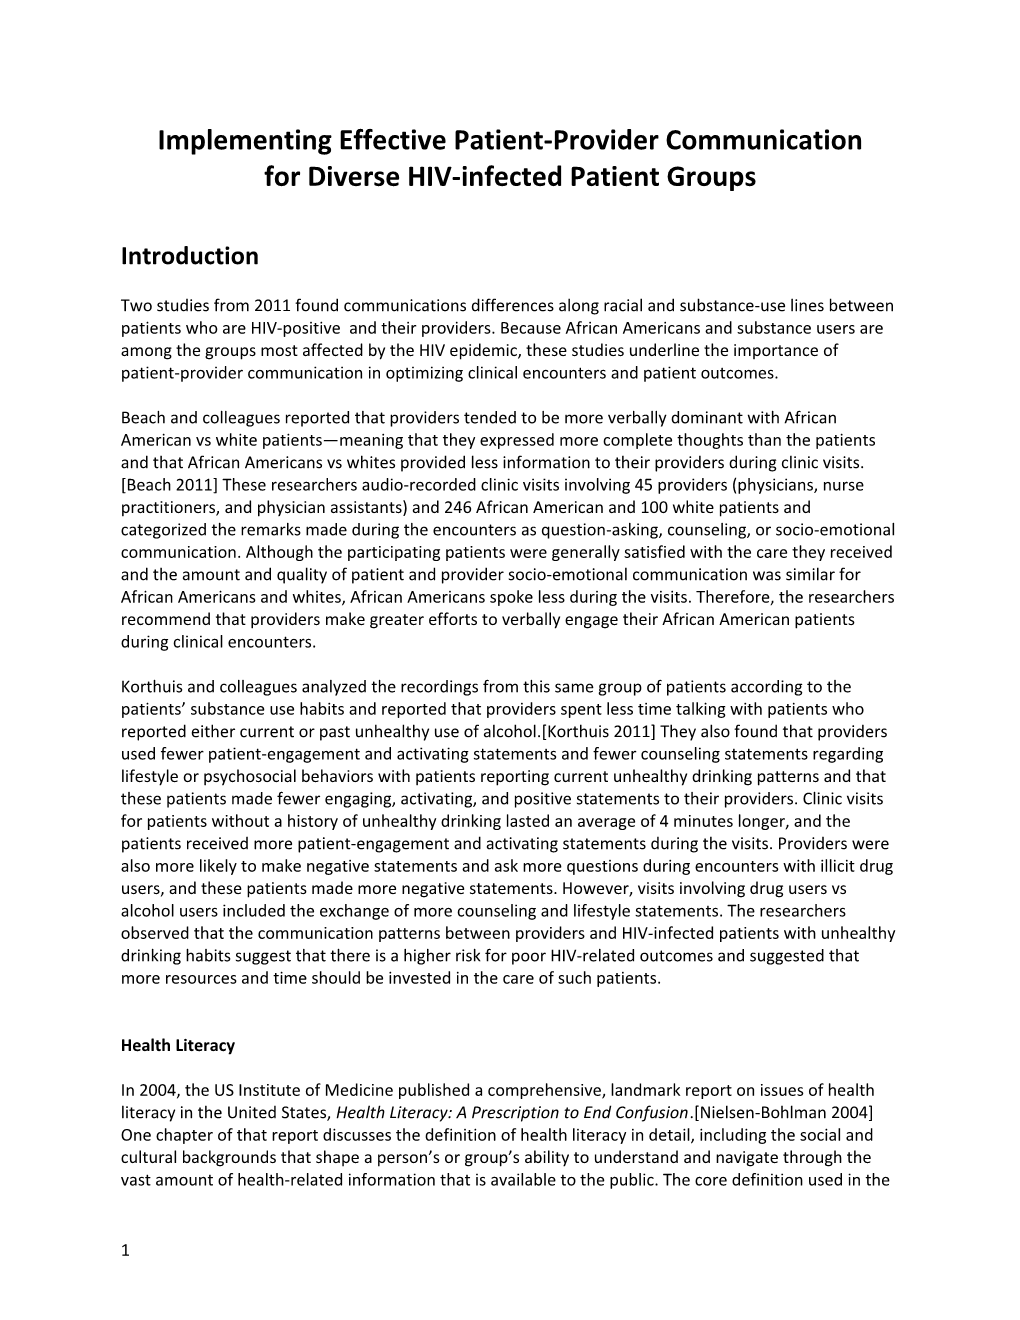 Implementing Effective Patient-Provider Communication for Diverse HIV-Infected Patient Groups